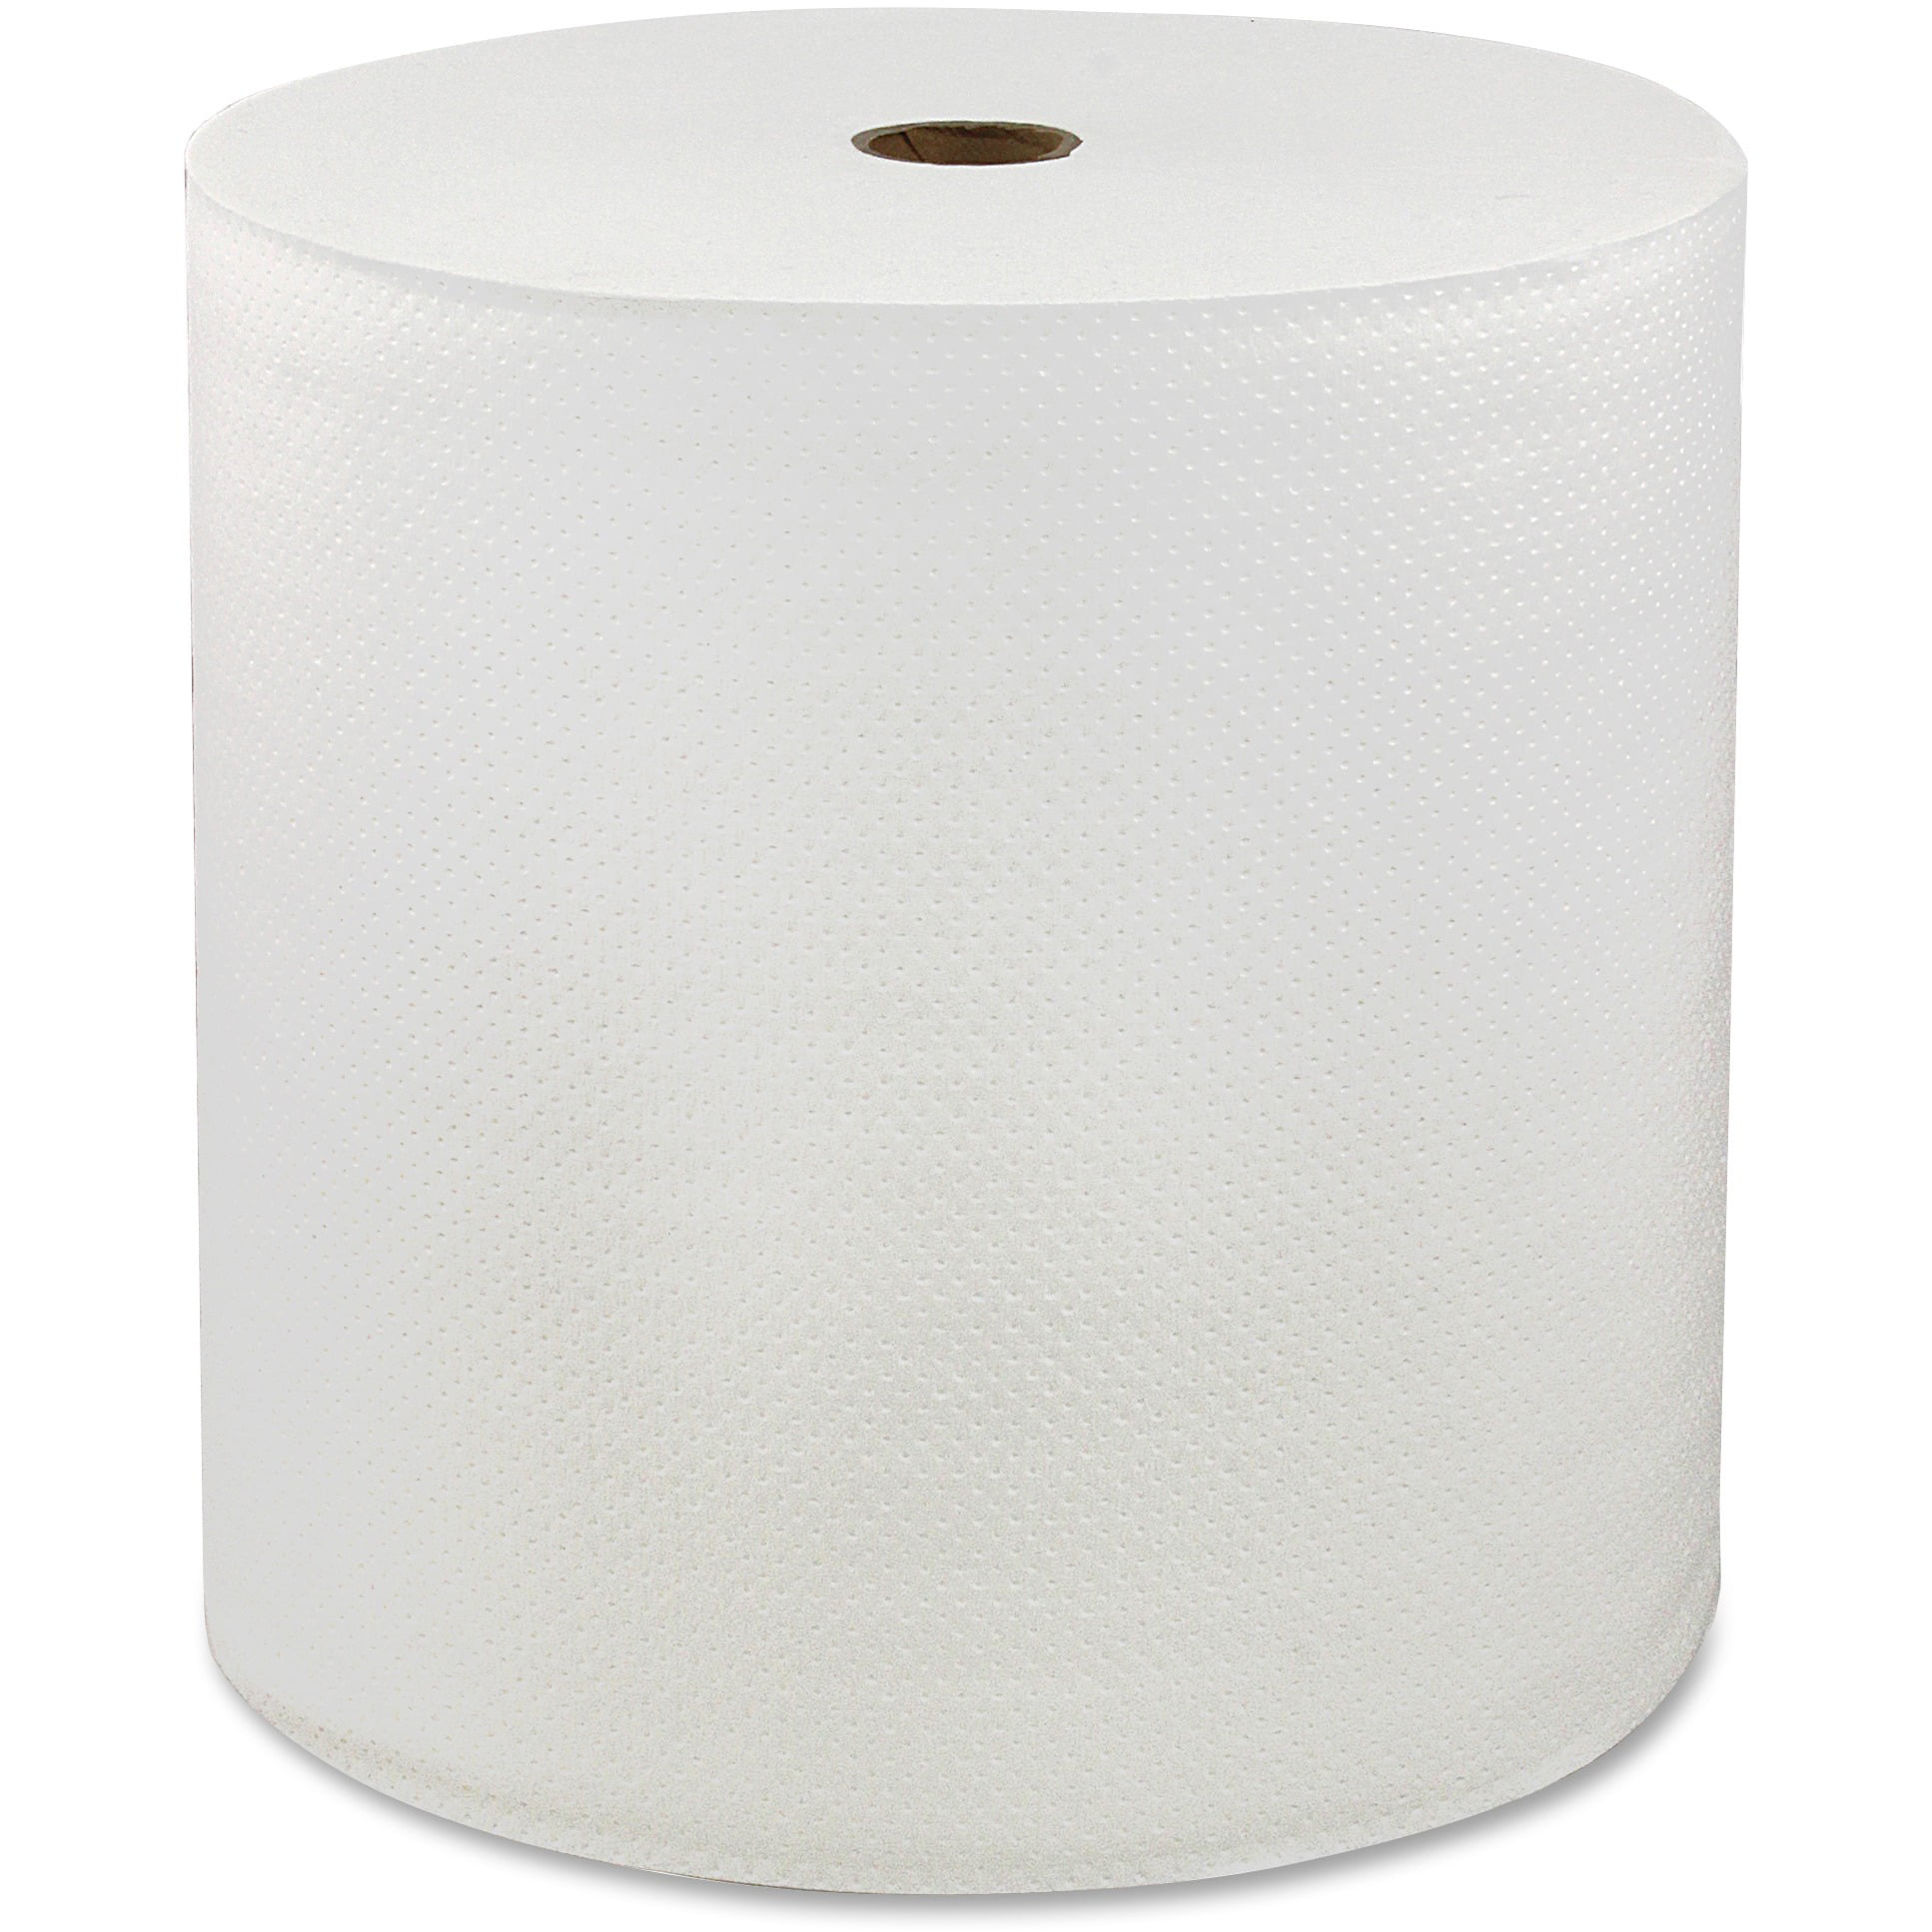 Cascades Roll Paper Towels 12 Rolls White 7 7/8" x 350 ft CSDH230 